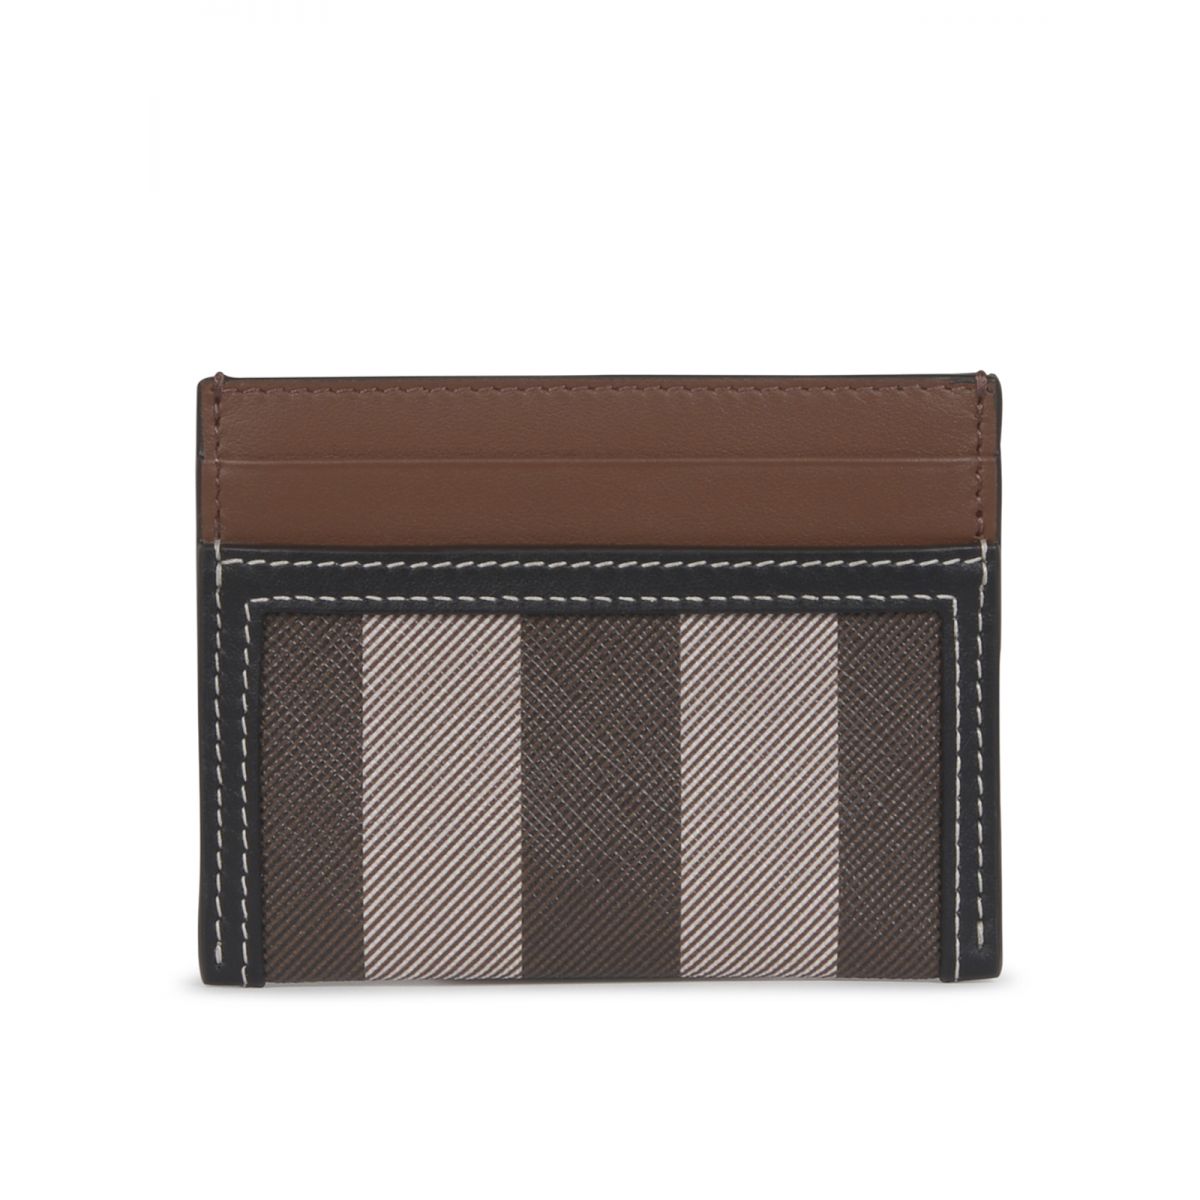 BURBERRY - Check and Two-tone Leather Card Case